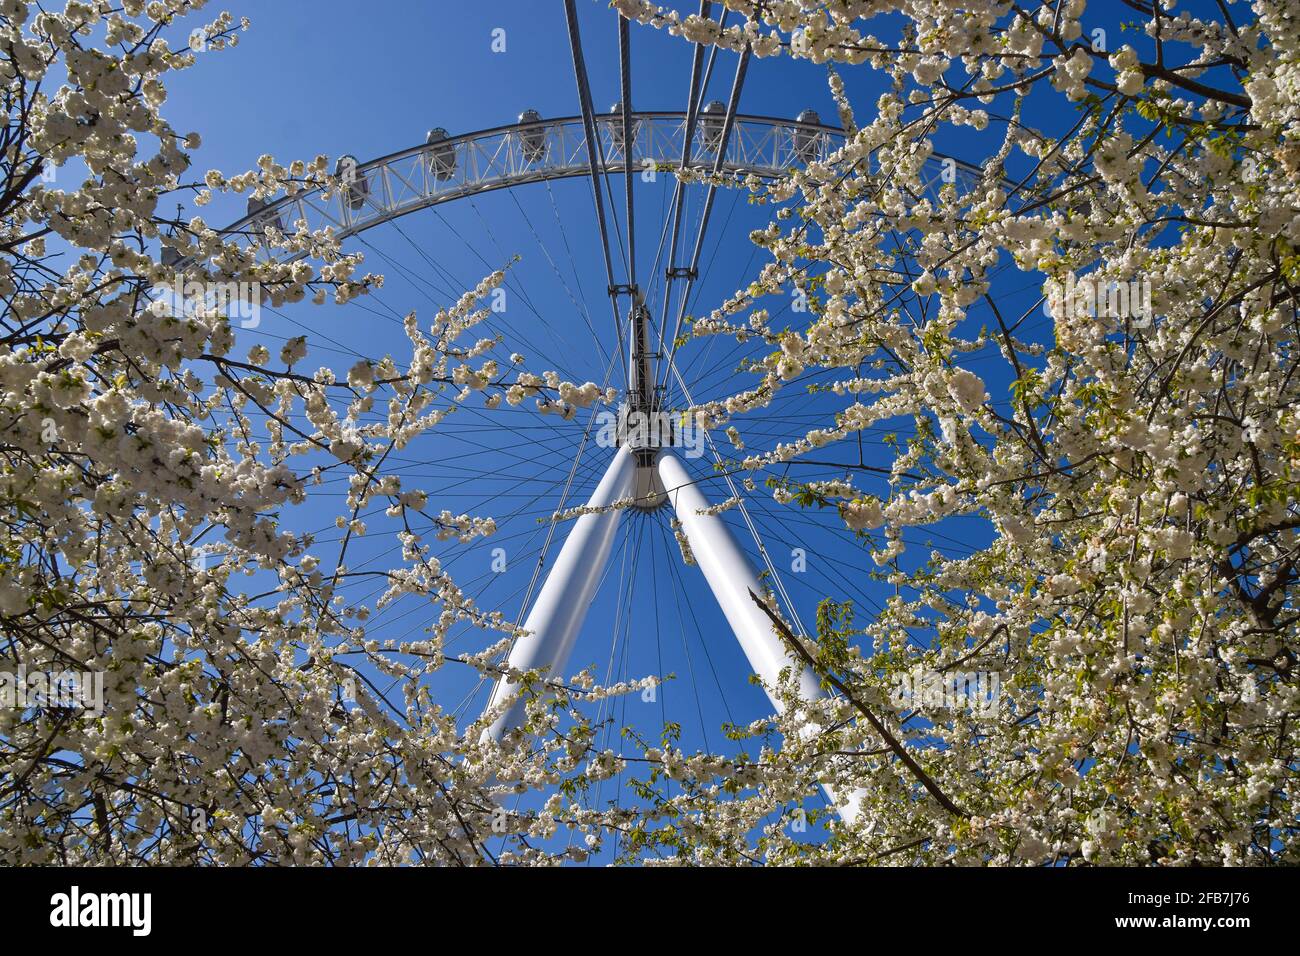 London, United Kingdom. 23rd April 2021. The London Eye and cherry blossom trees on a warm, clear day. Credit: Vuk Valcic/Alamy Live News Stock Photo